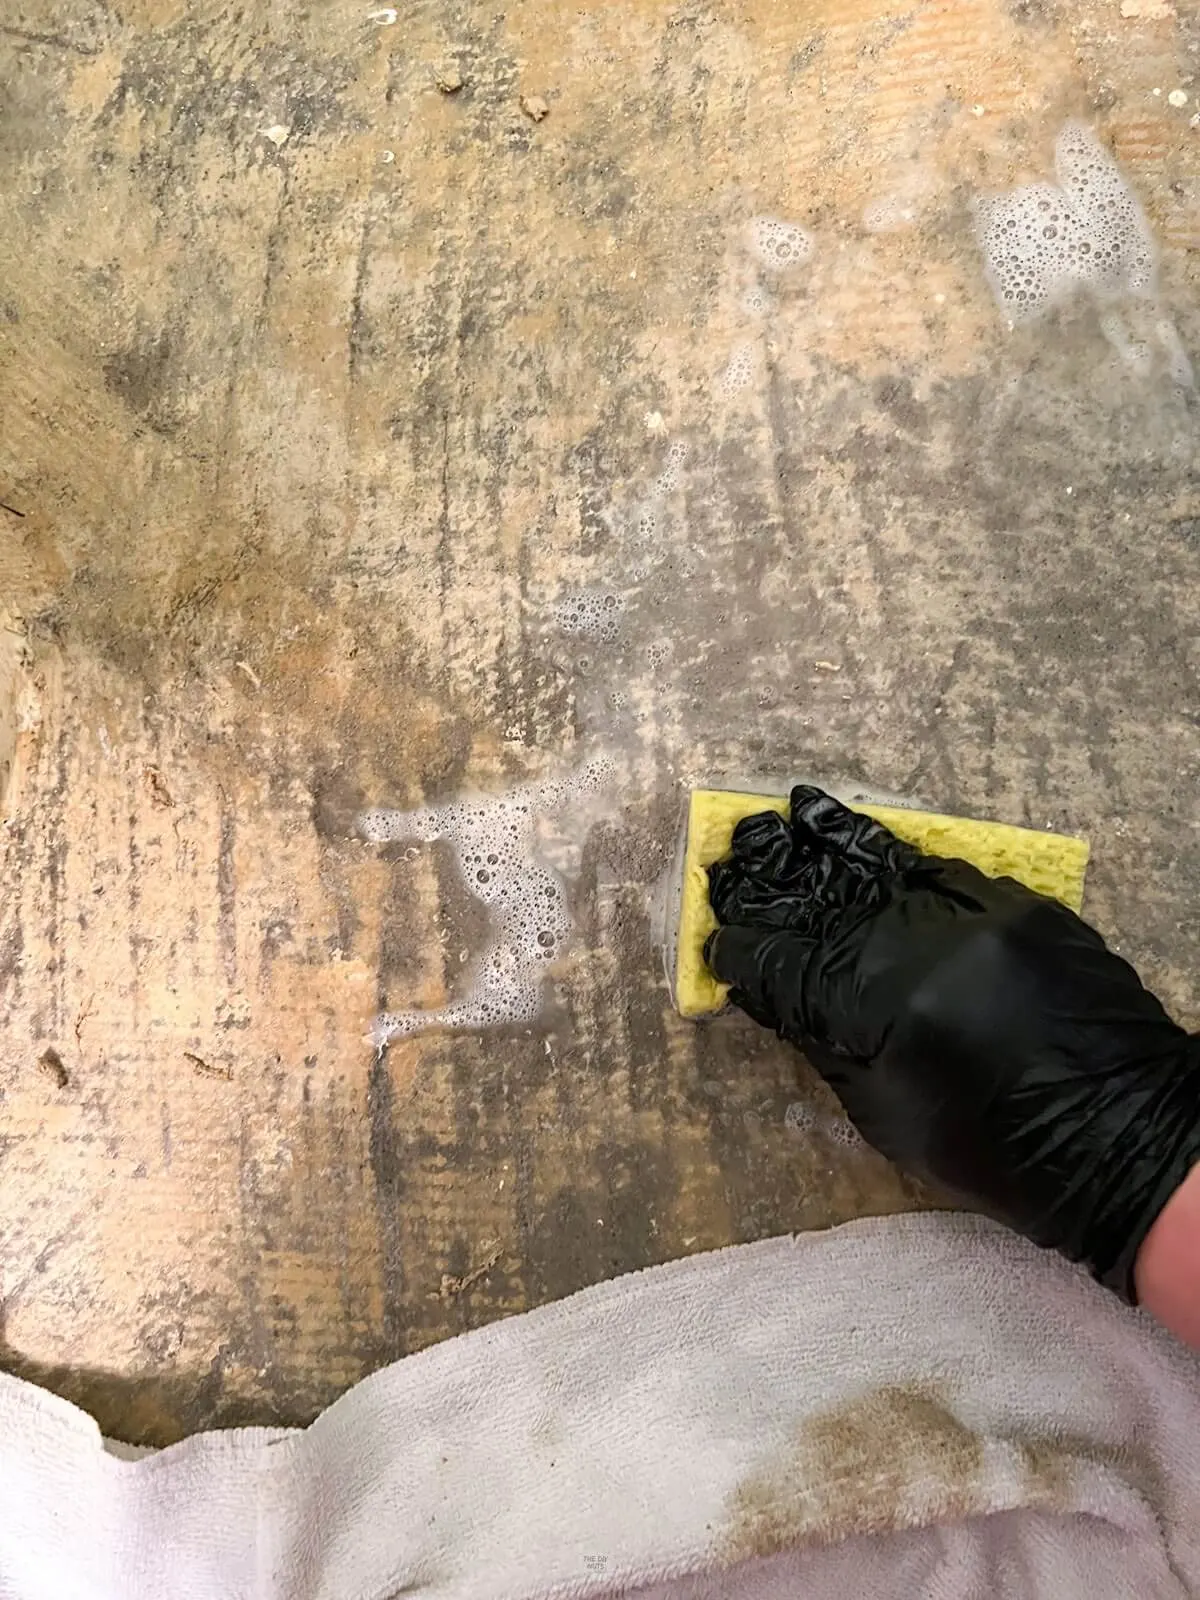 hand wearing glove using yellow sponge to clean floor with carpet glue on it.